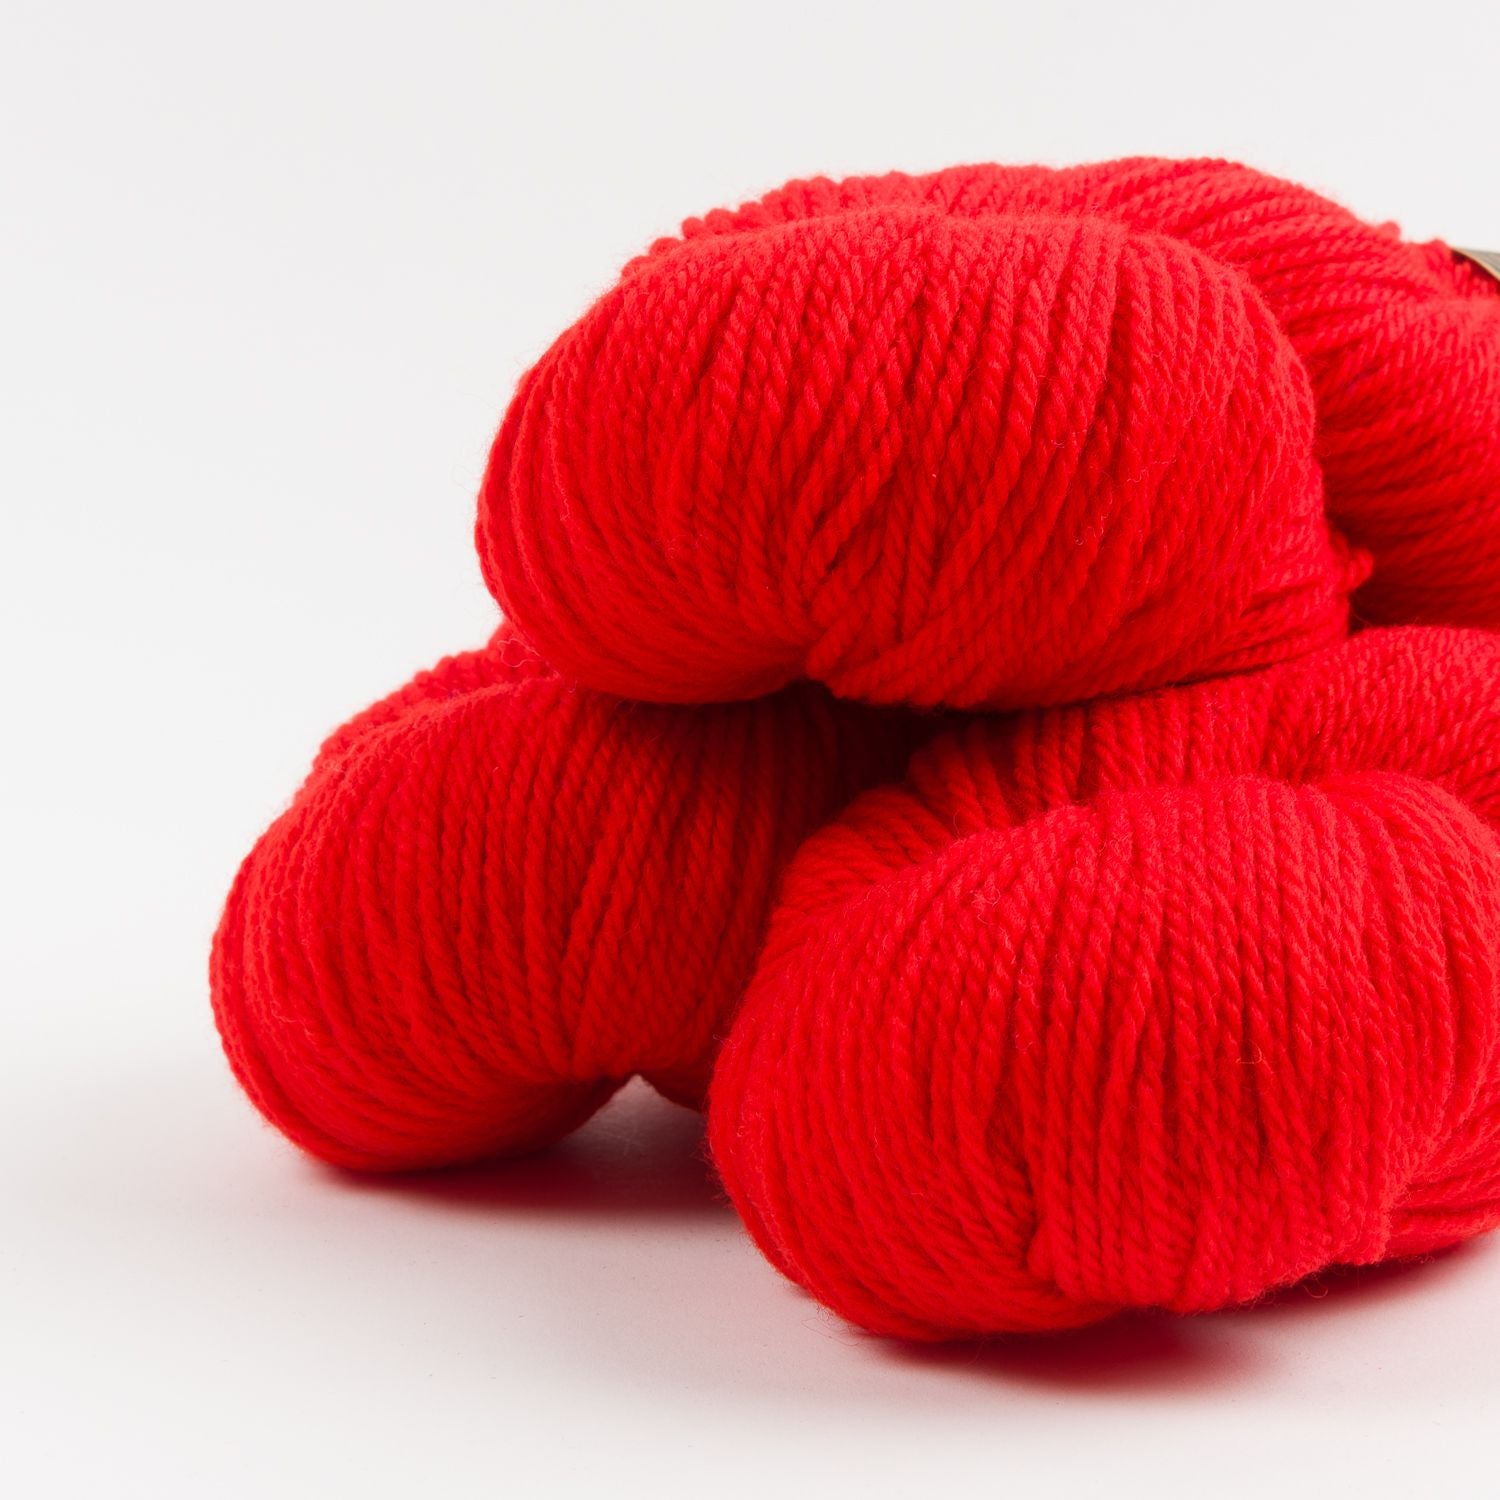 WESTKNITS KIT - RED HOT DK QUINT